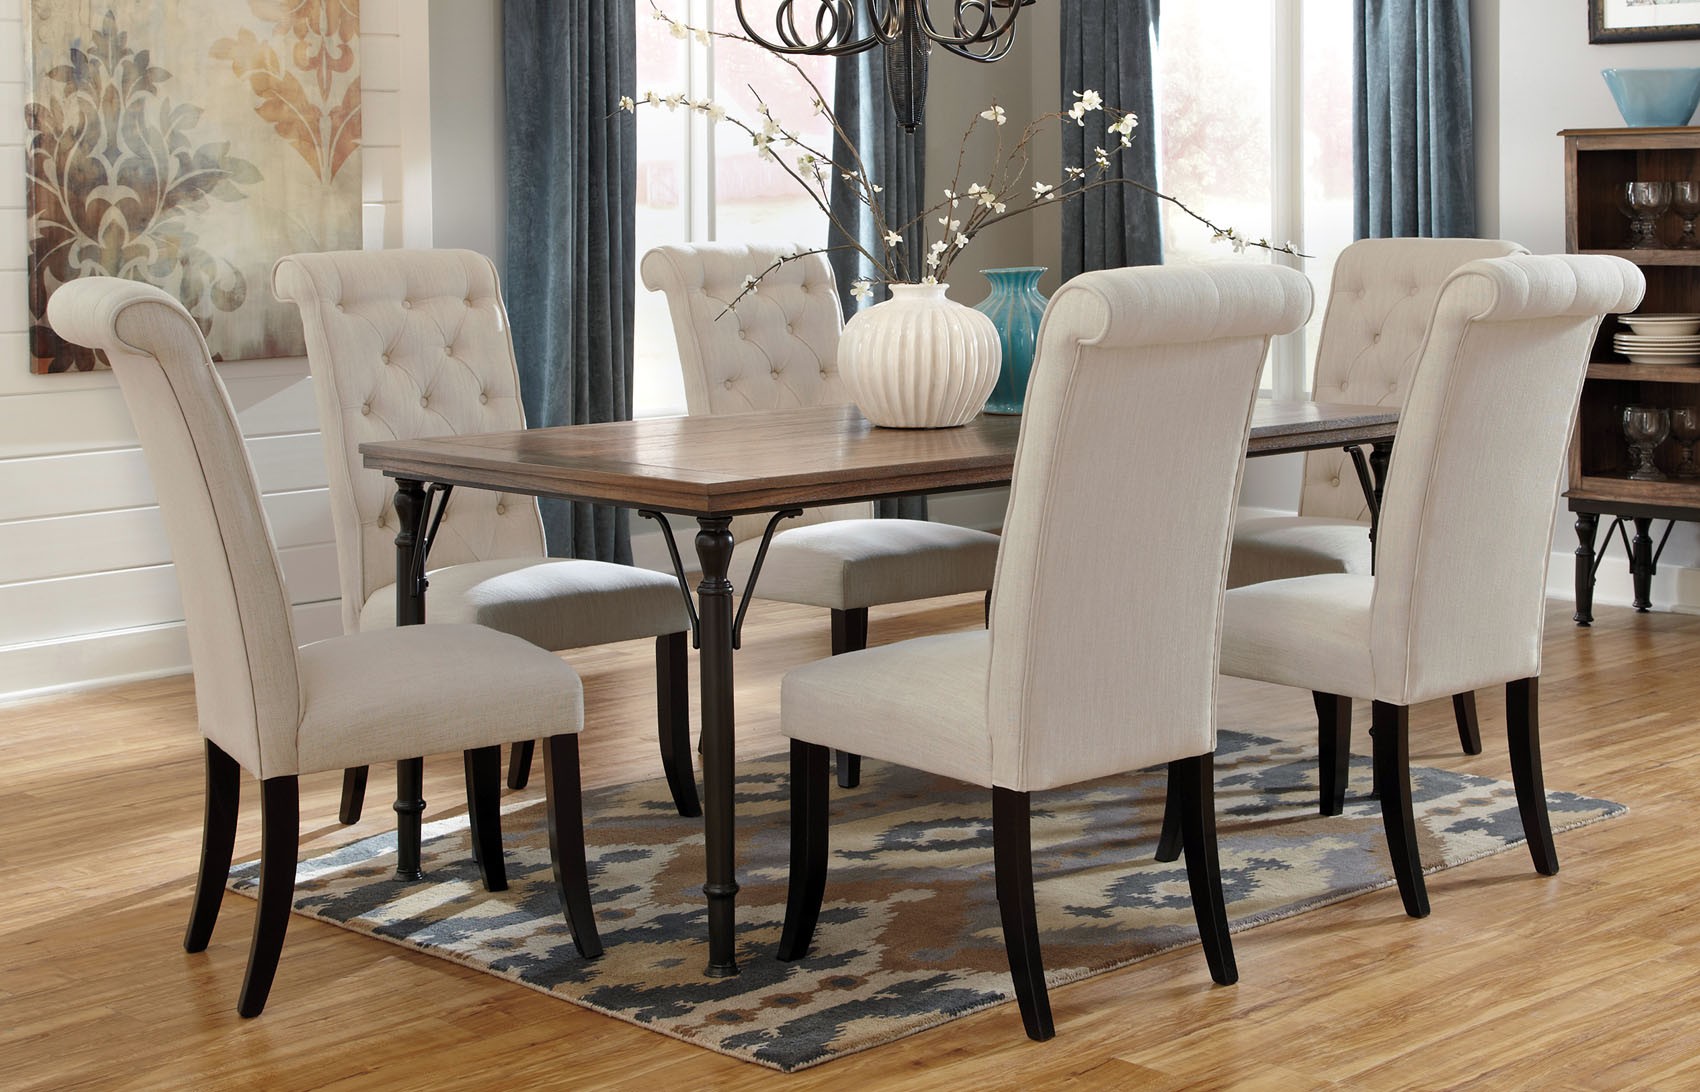 Tufted Bench And Chairs Dining Room